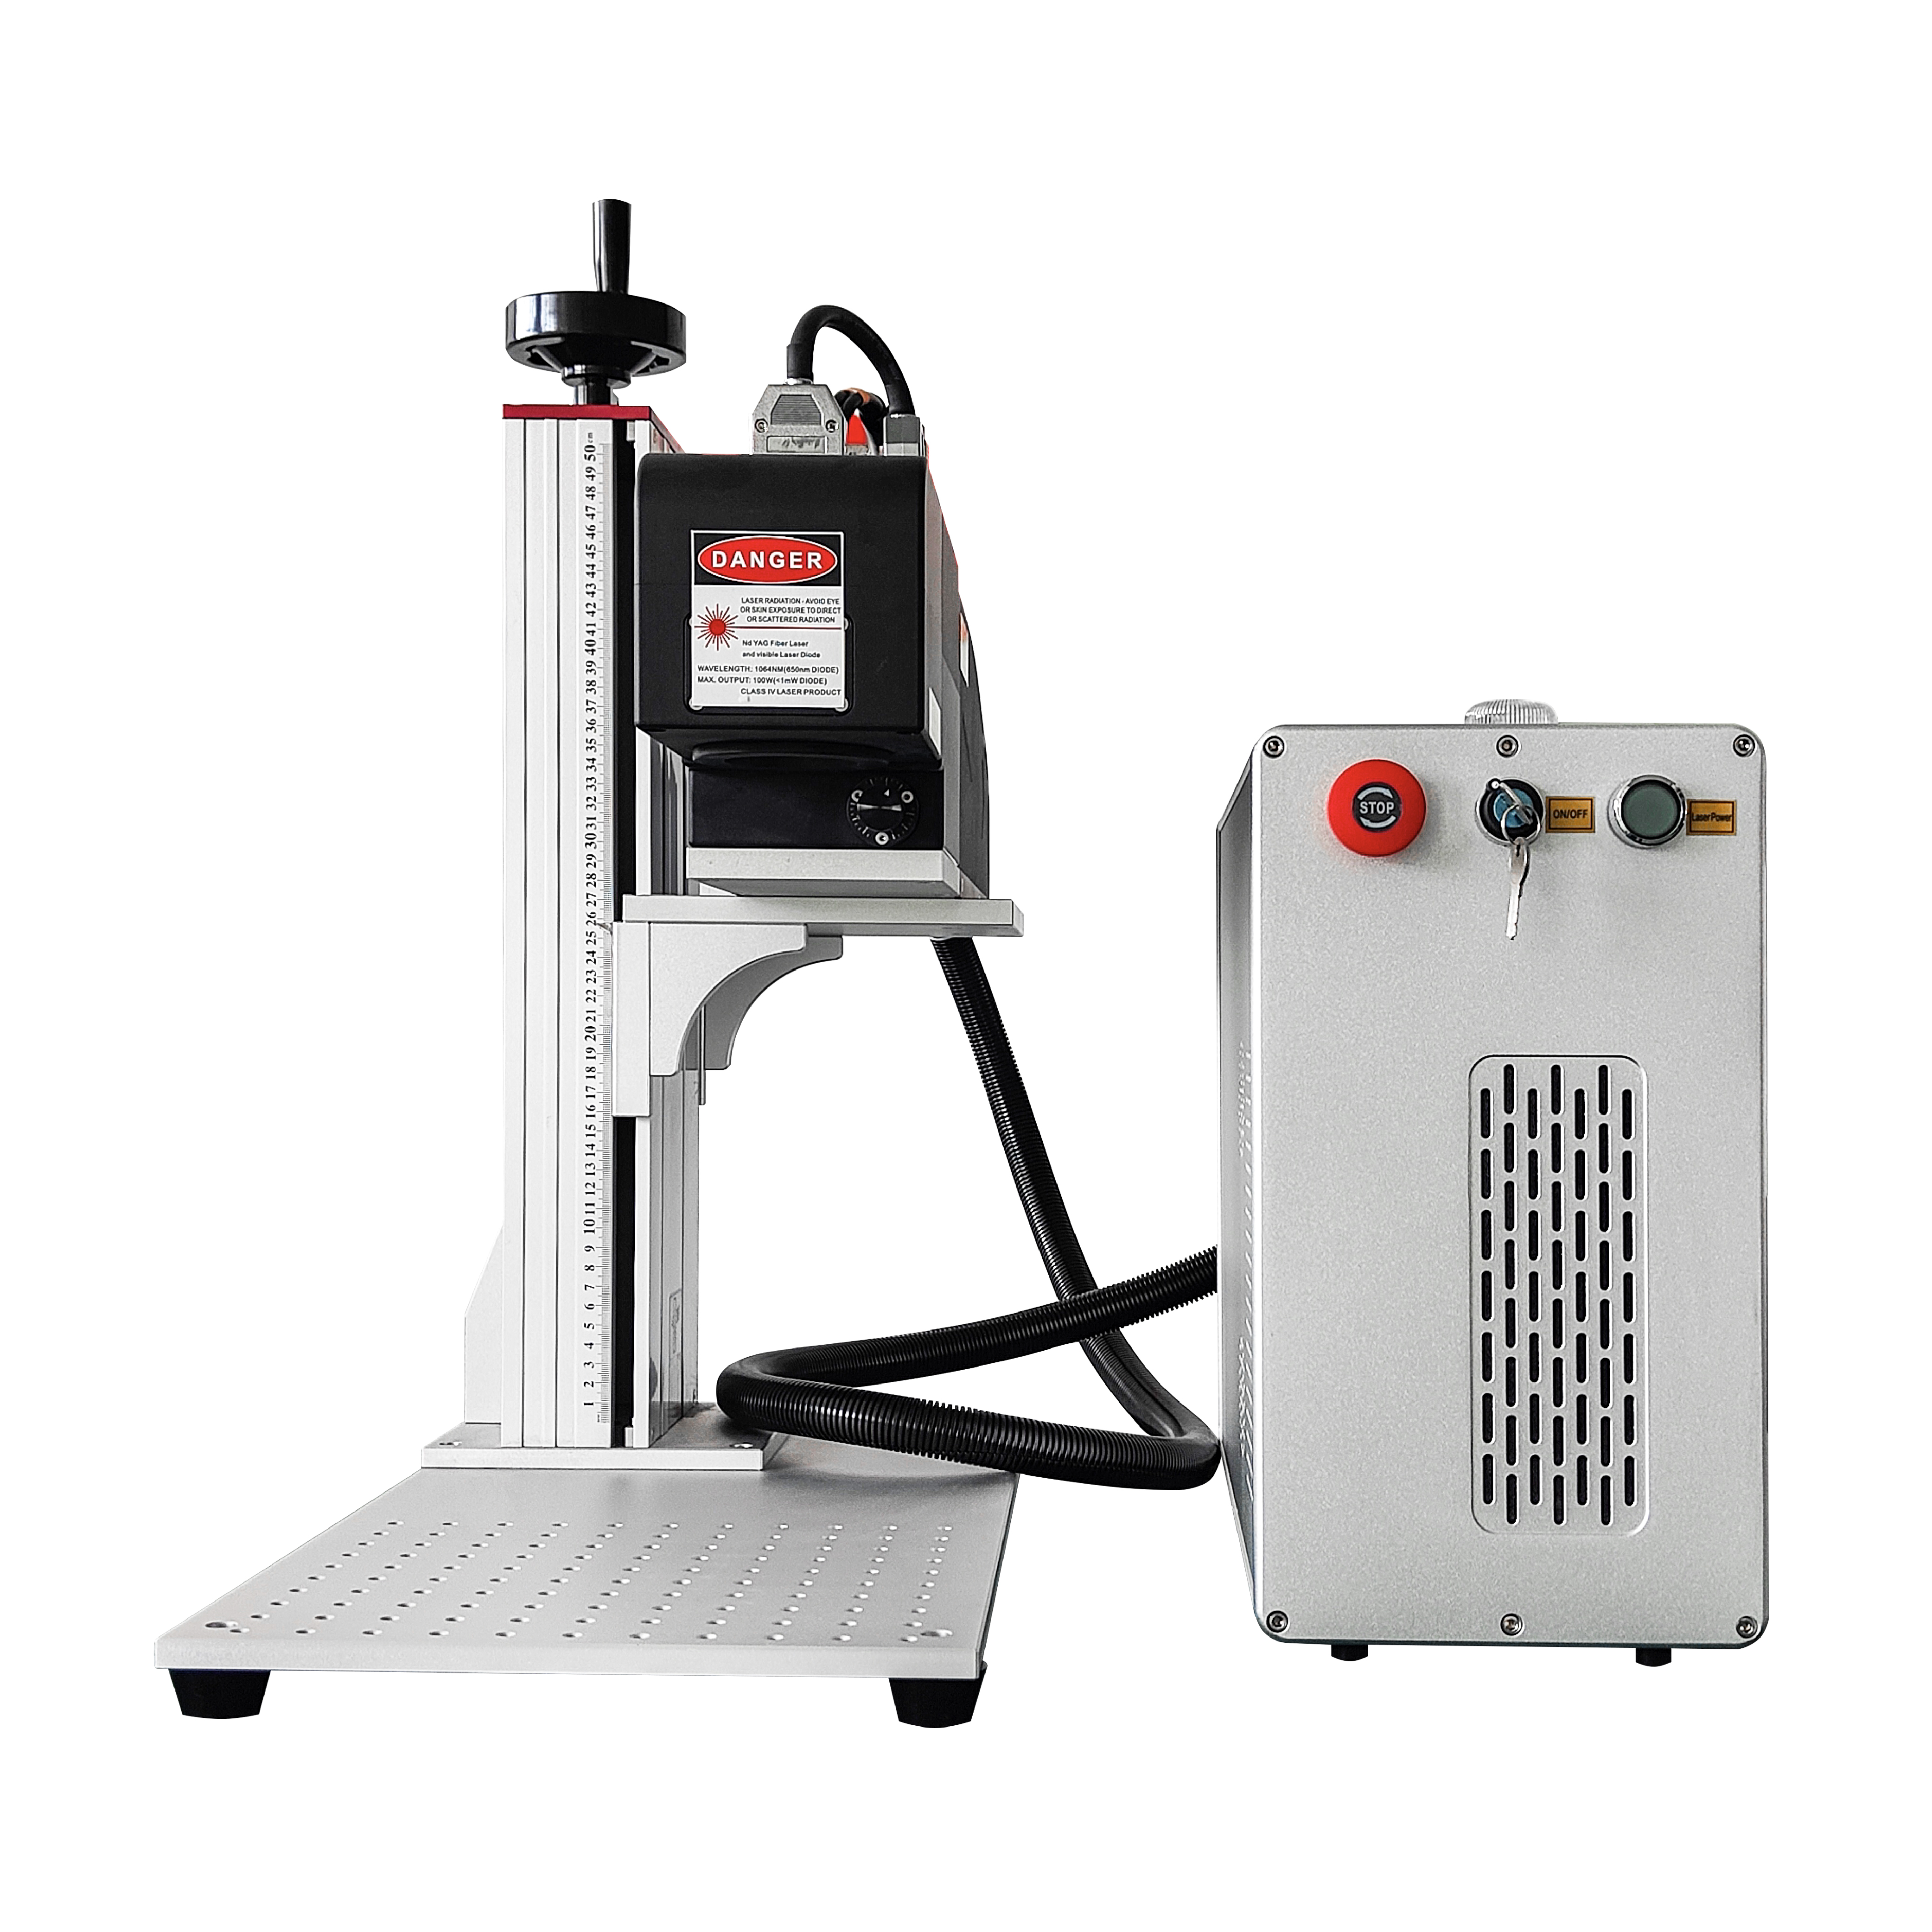 Portable JPT Raycus 50W 60W 100W 3D Fiber Laser Marking Machine Relief Engraving Curved Surface Marker